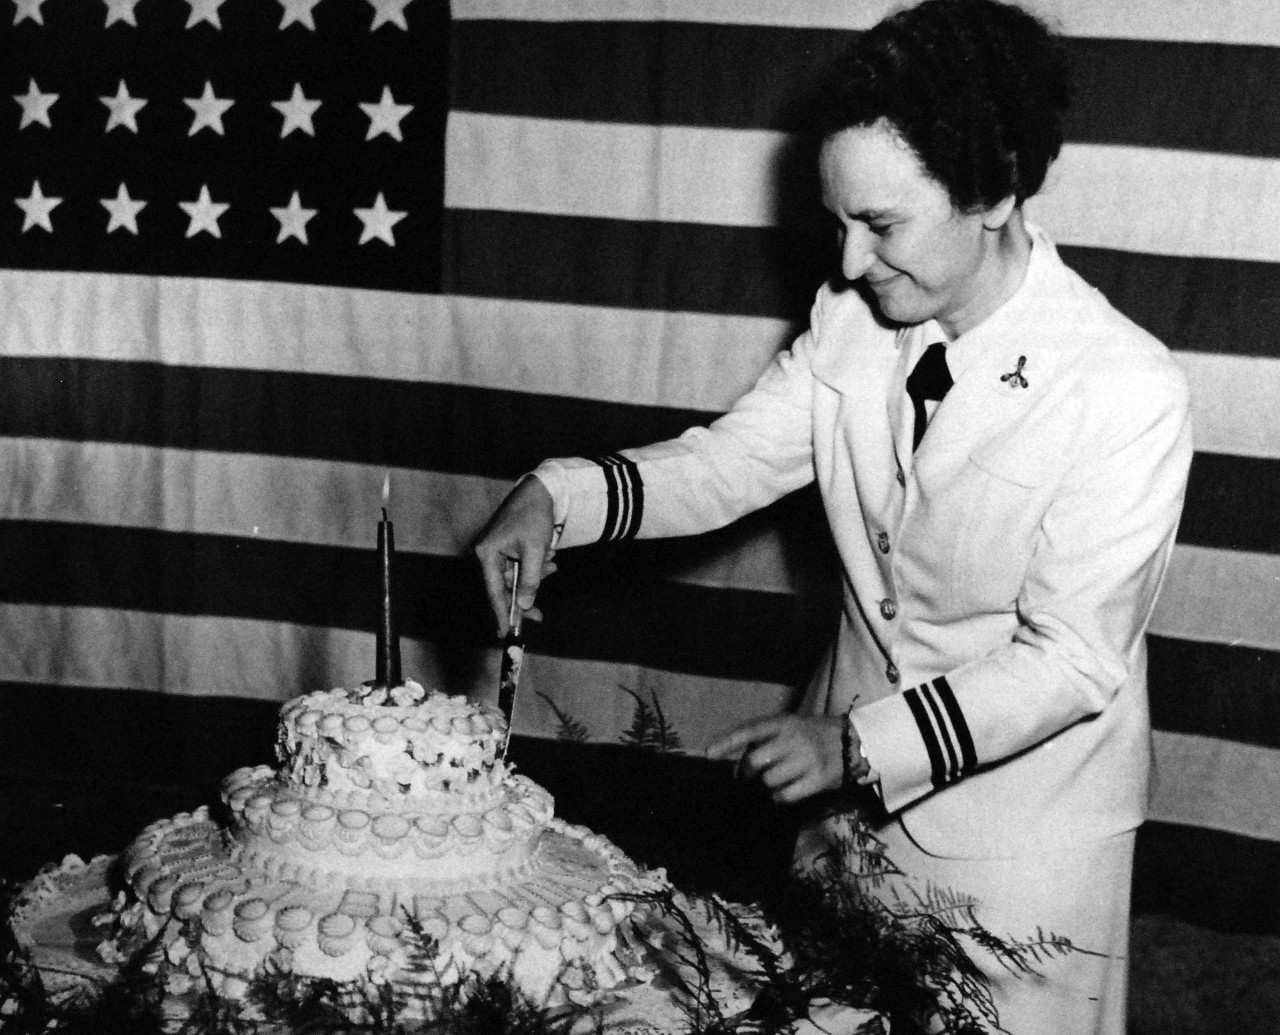 80-G-42486:   Celebration of the WAVES’ first anniversary, July 1943.   Lieutenant Commander Mildred H. McAfee, Director of the Women’s Reserve of the Navy, cuts the cake at a dance held at the Mayflower Hotel, Washington, D.C.,  July 30, 1943.  Official U.S. Navy photograph, now in the collections of the National Archives.  